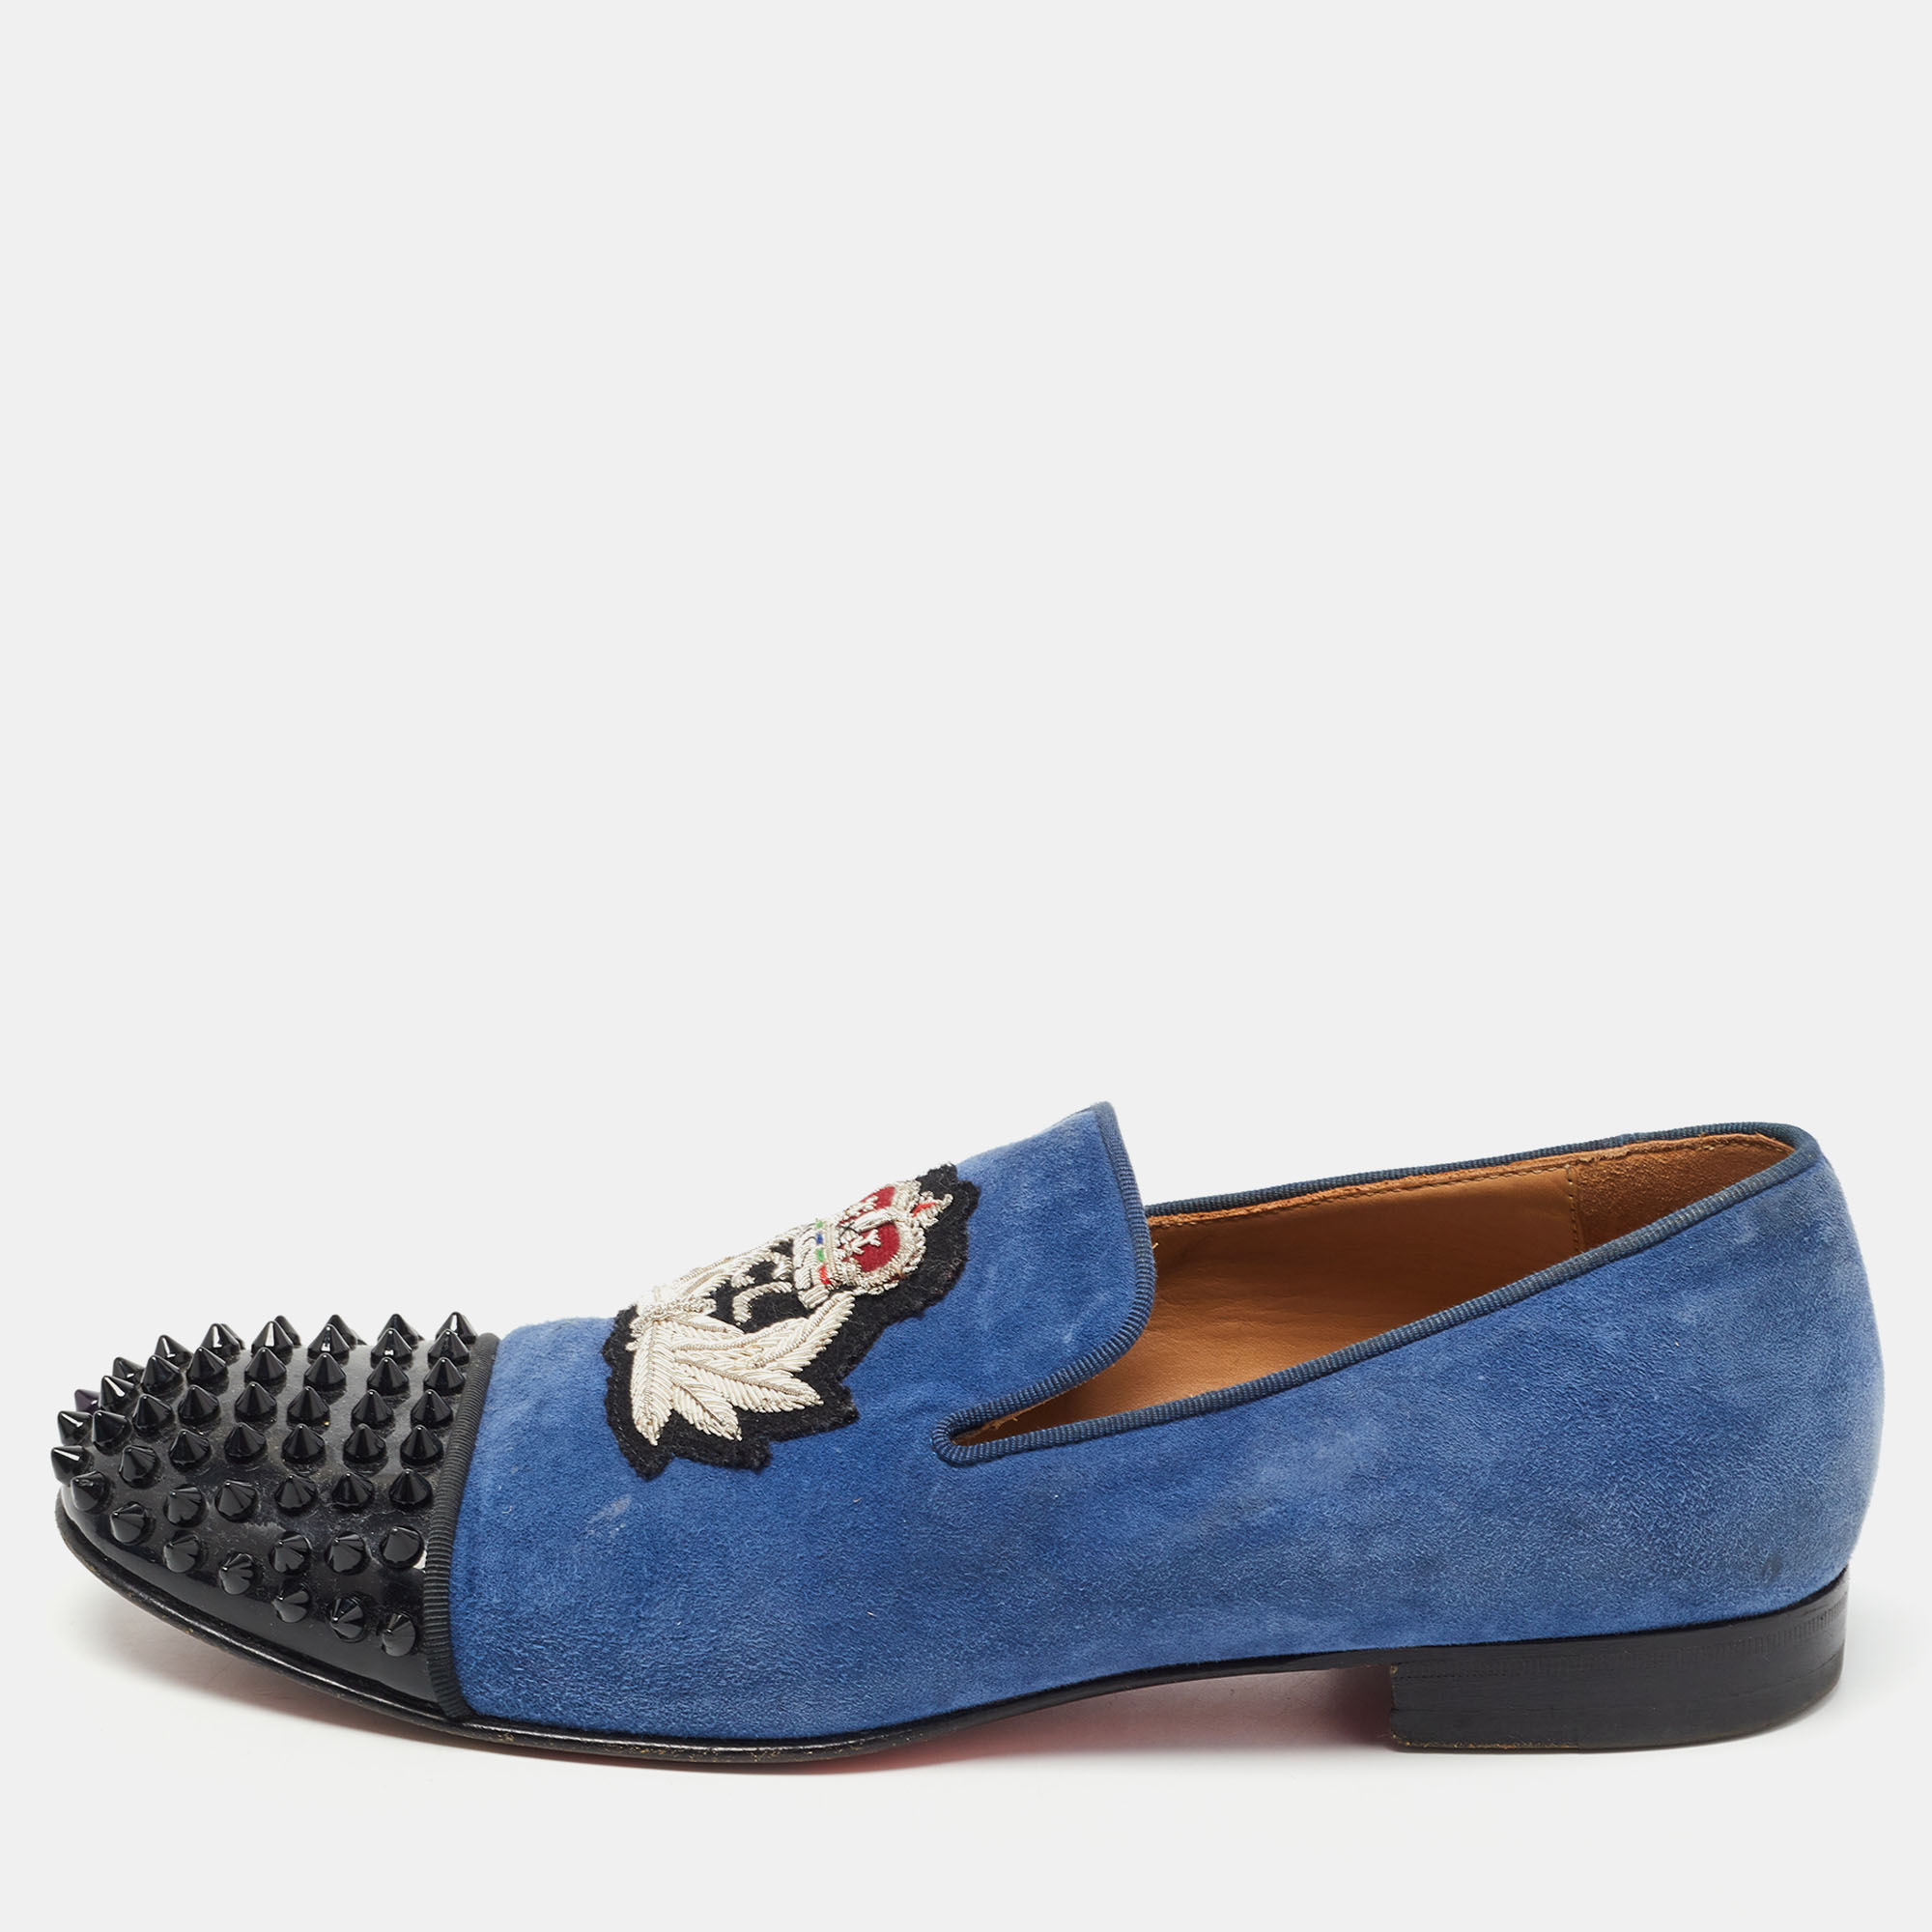 Pre-owned Christian Louboutin Blue/black Suede And Patent Leather Harvanana Spiked Smoking Slippers Size 40